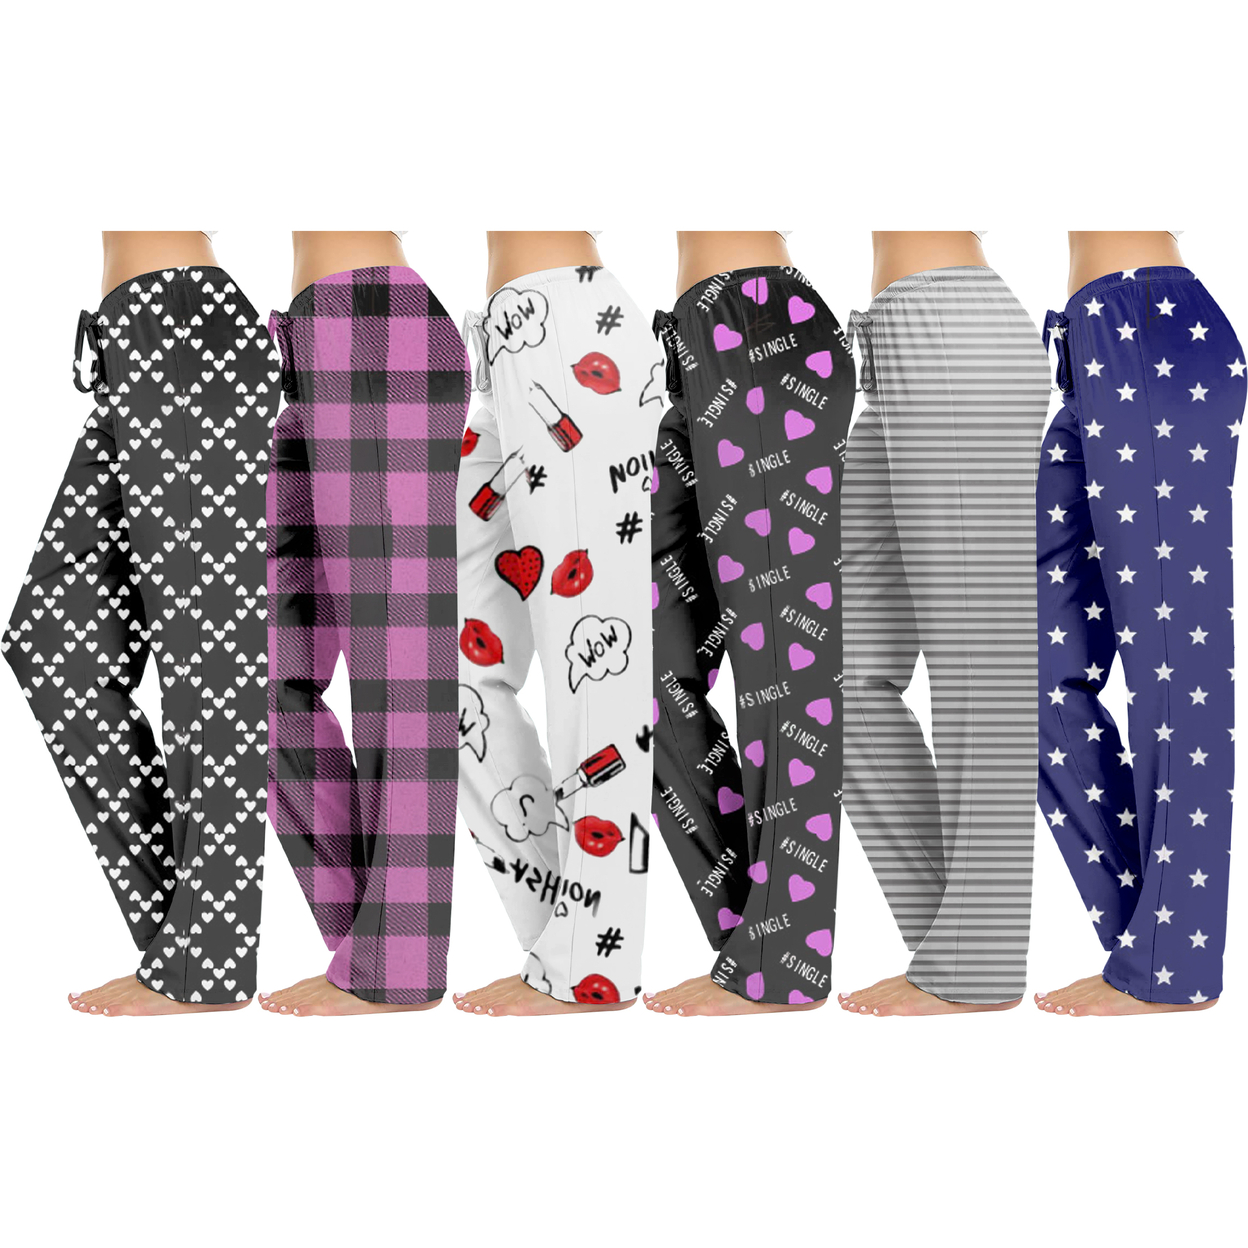 5-Pack: Women's Casual Fun Printed Lightweight Lounge Terry Knit Pajama Bottom Pants - Small, Shapes